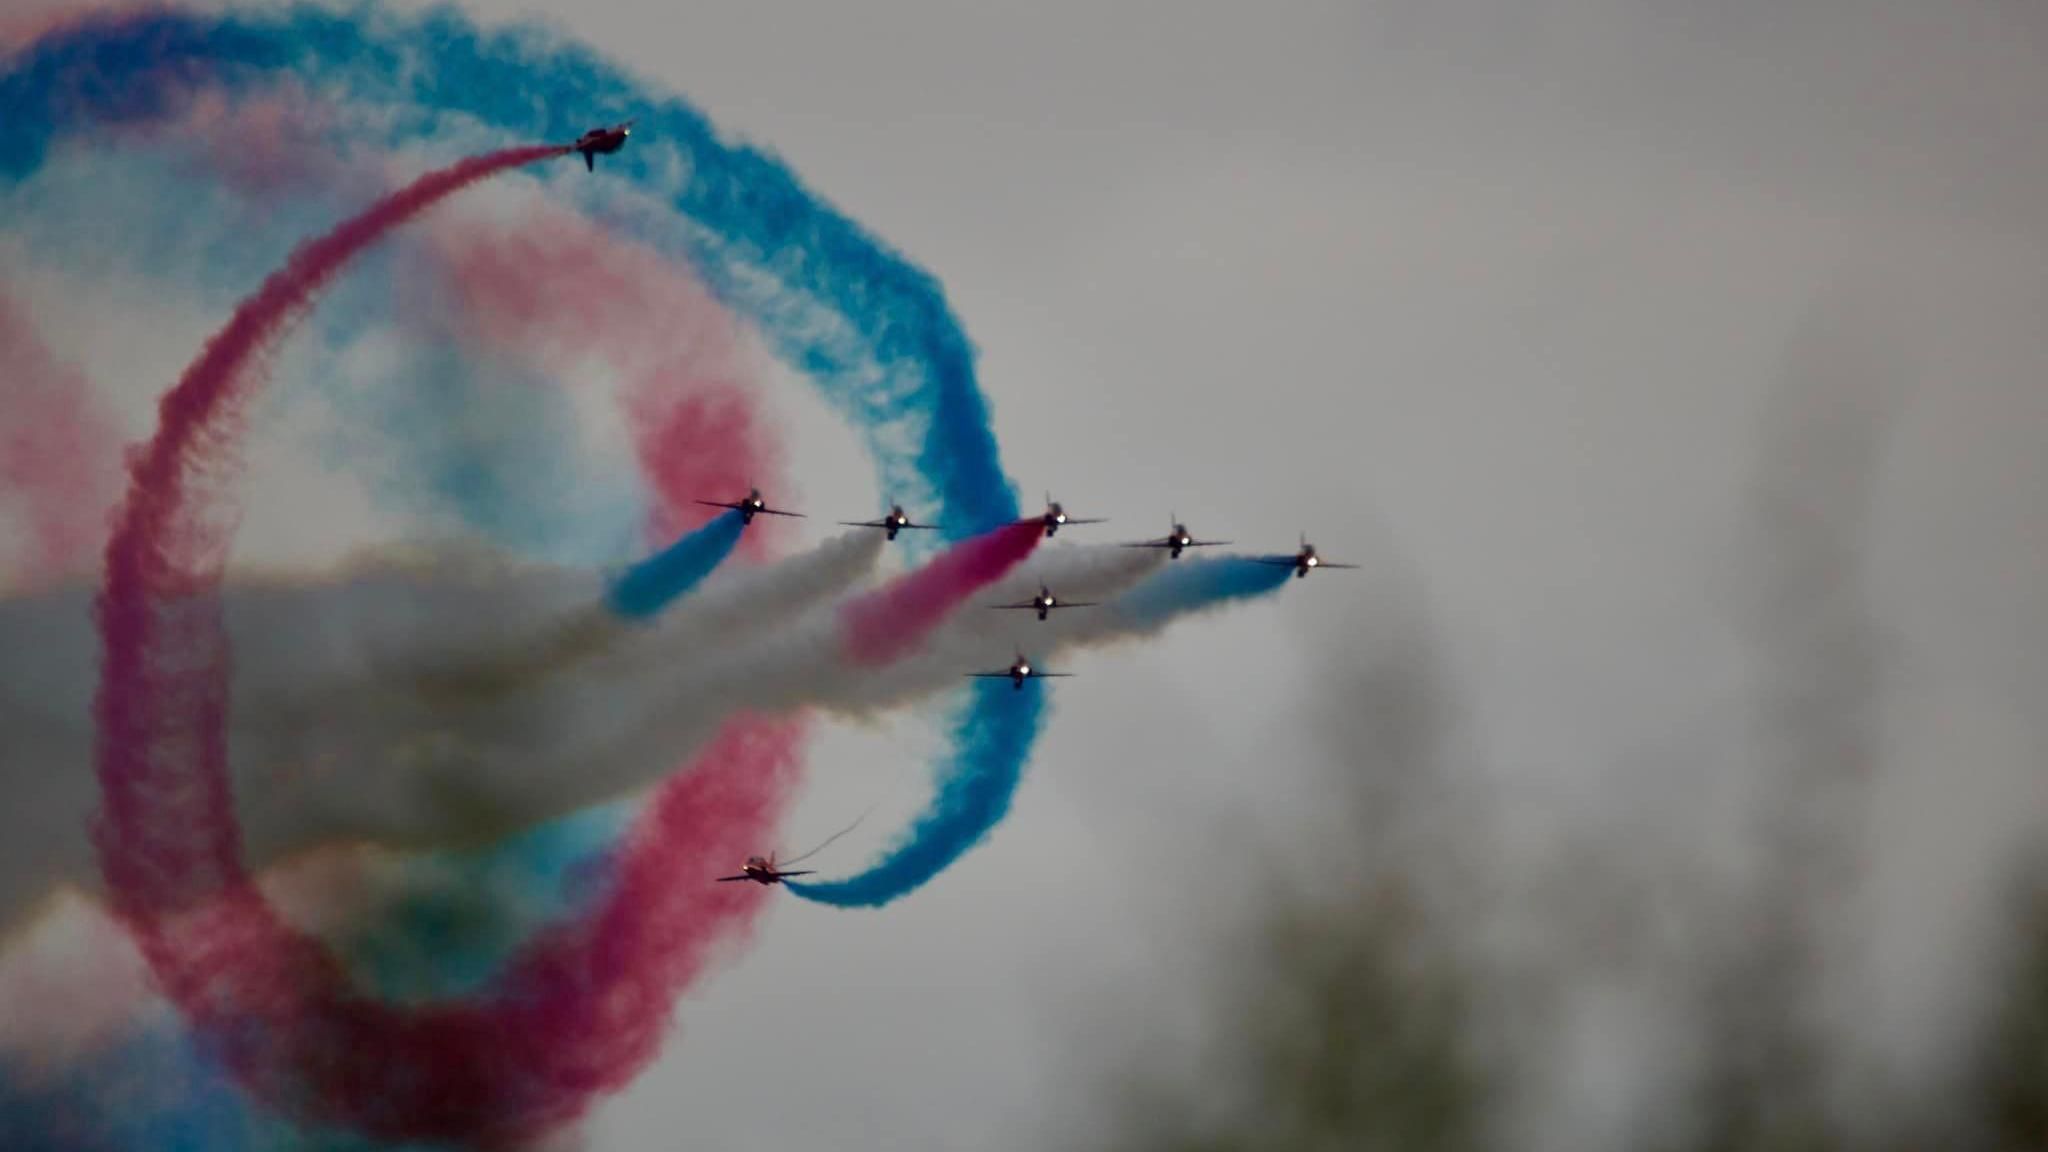 The Red Arrows flying, surrounded by swirls of smoke